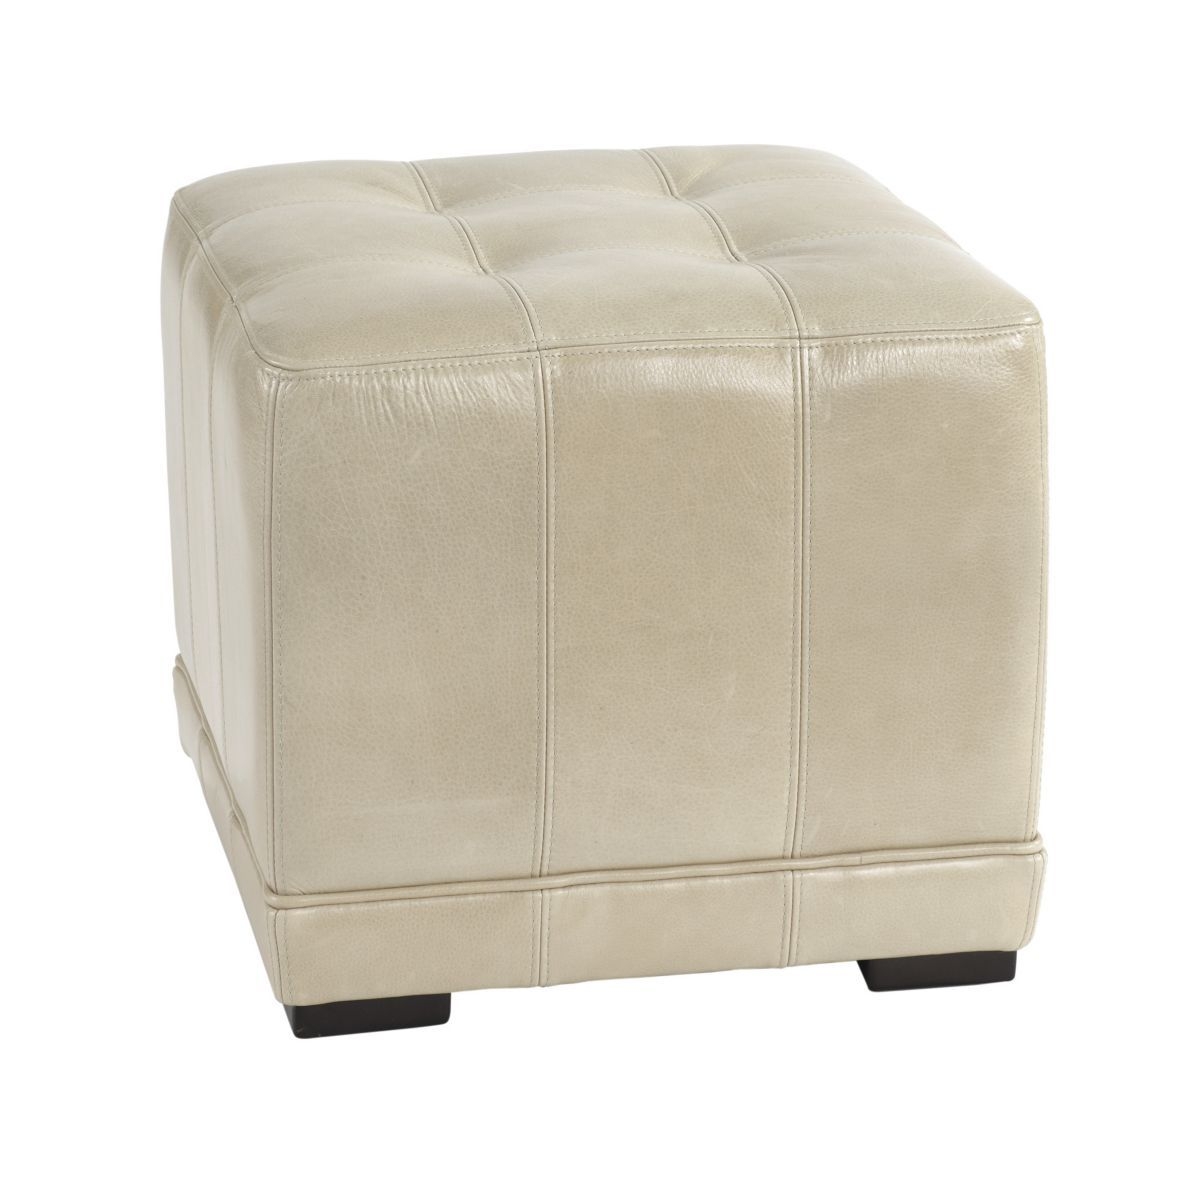 Leather cube ottomans 20